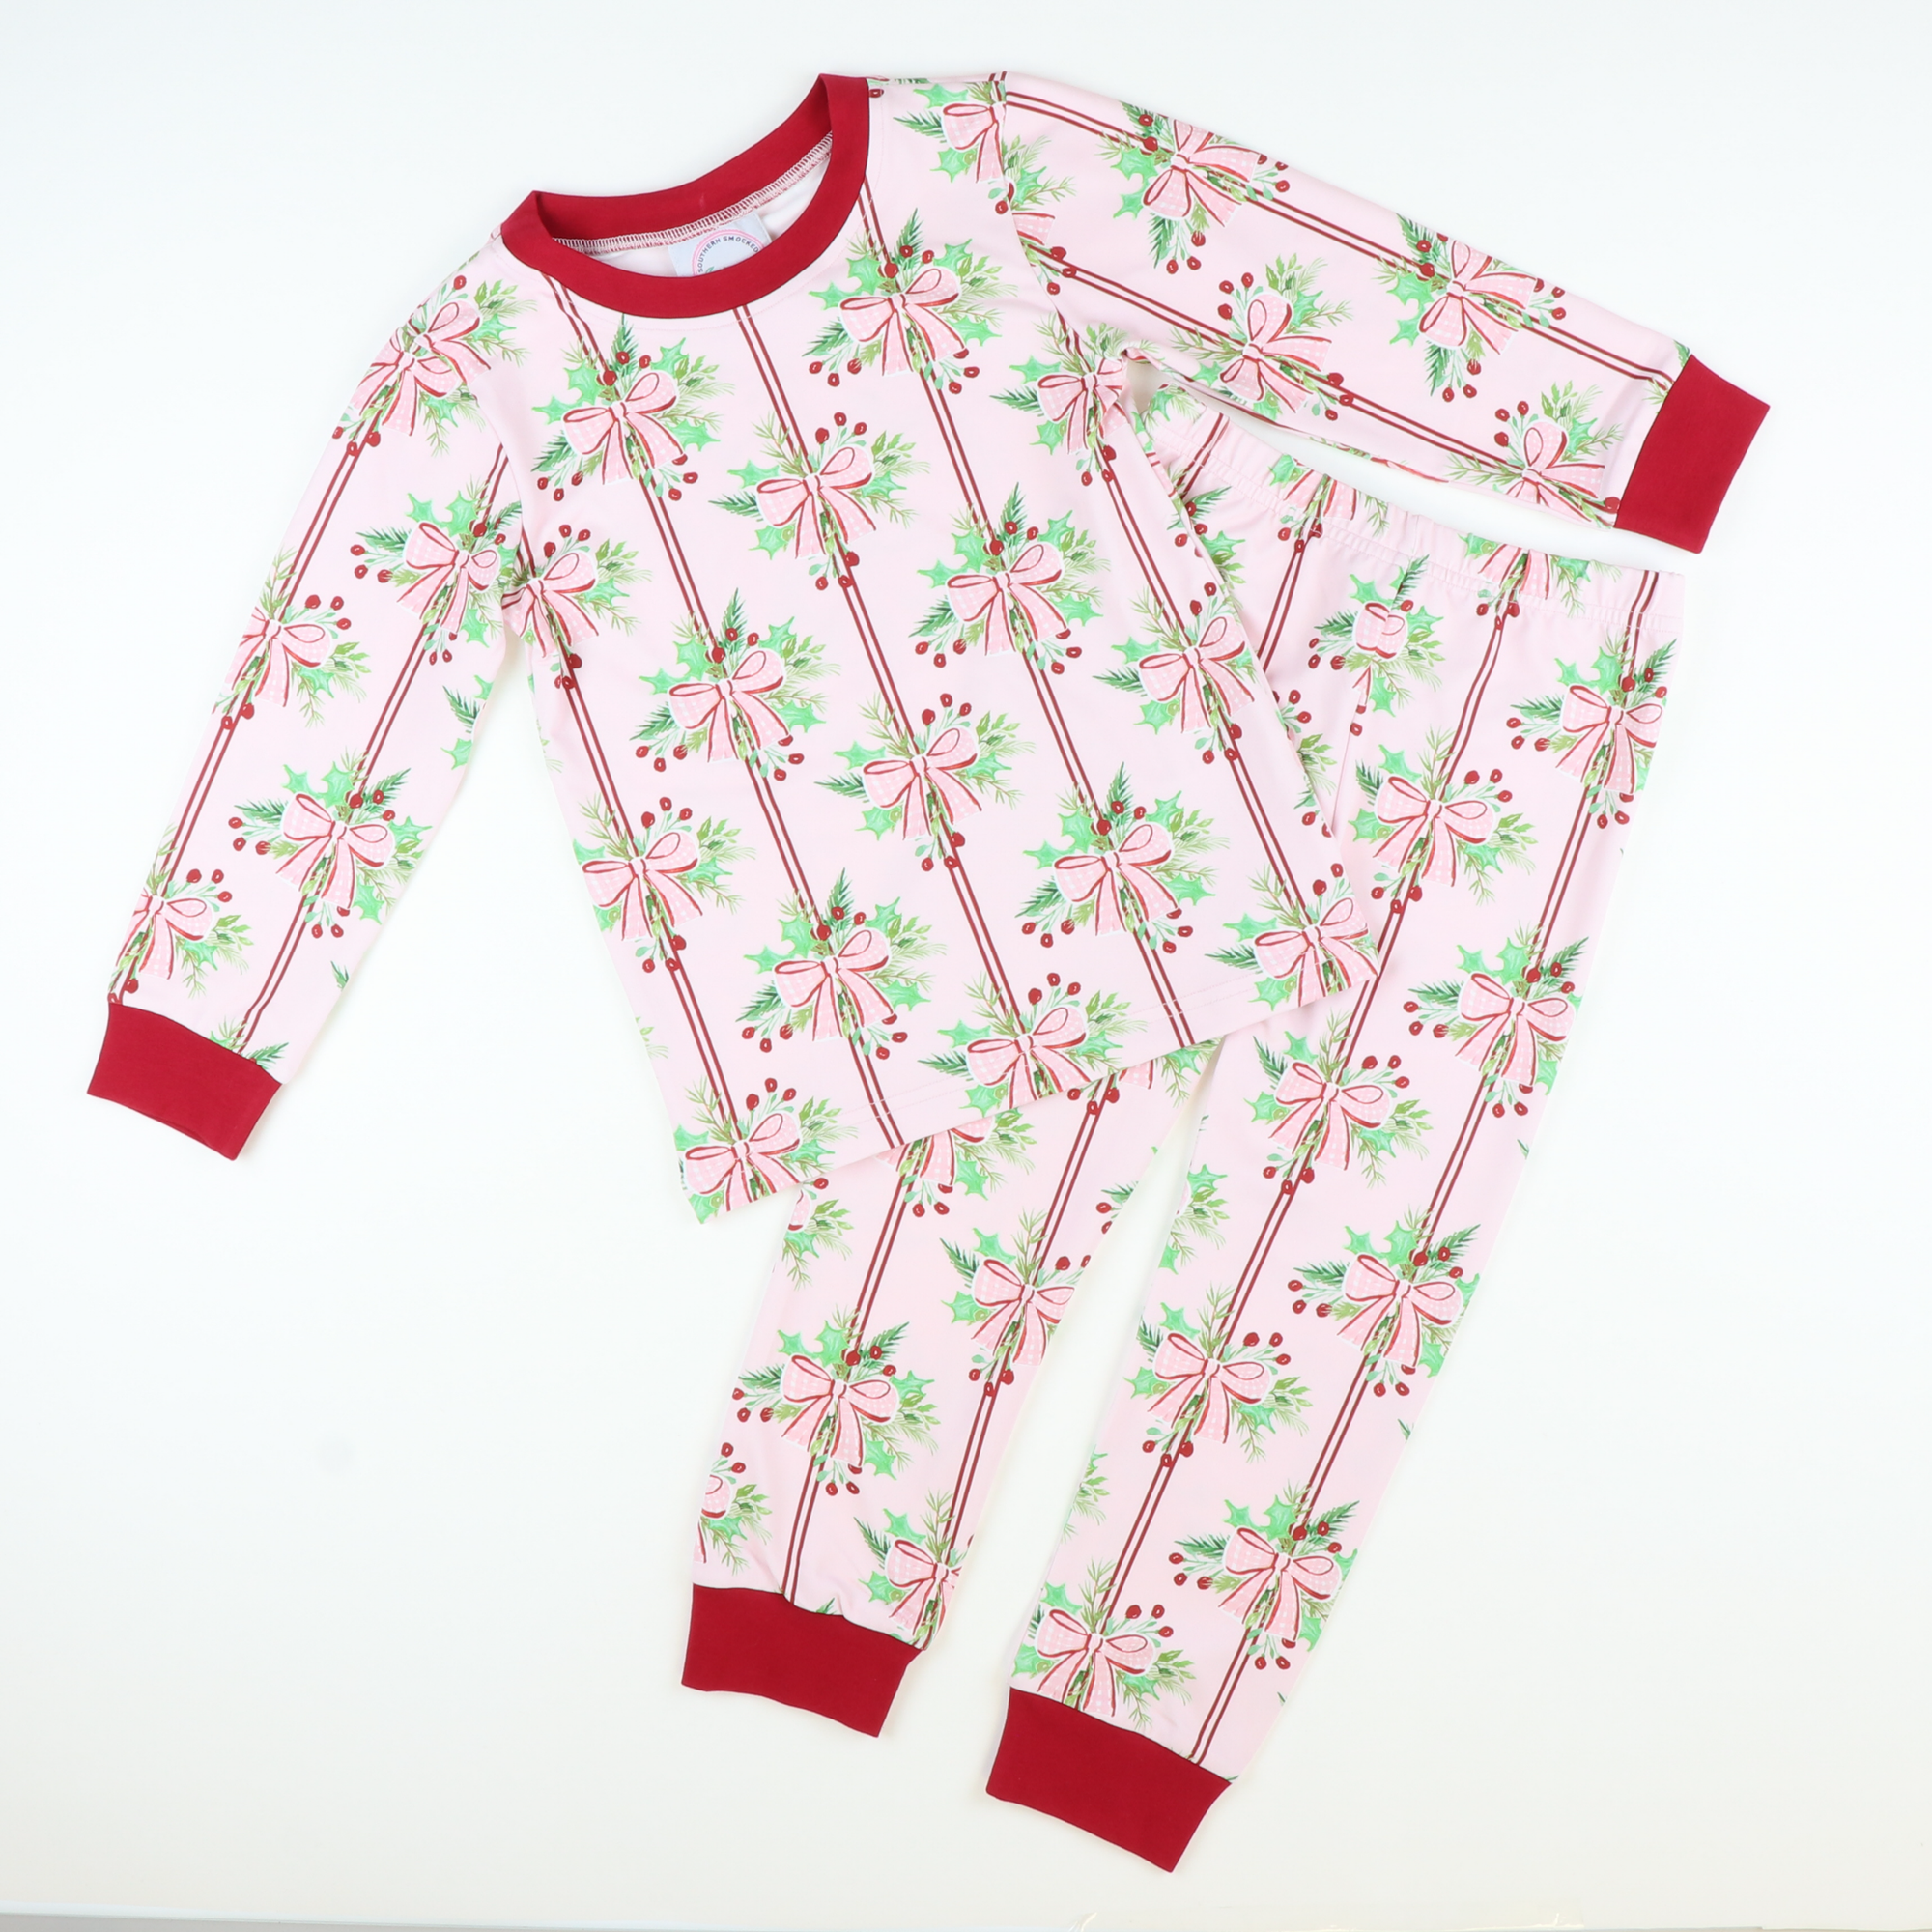 Berries & Bows Knit Pajama Set - Stellybelly